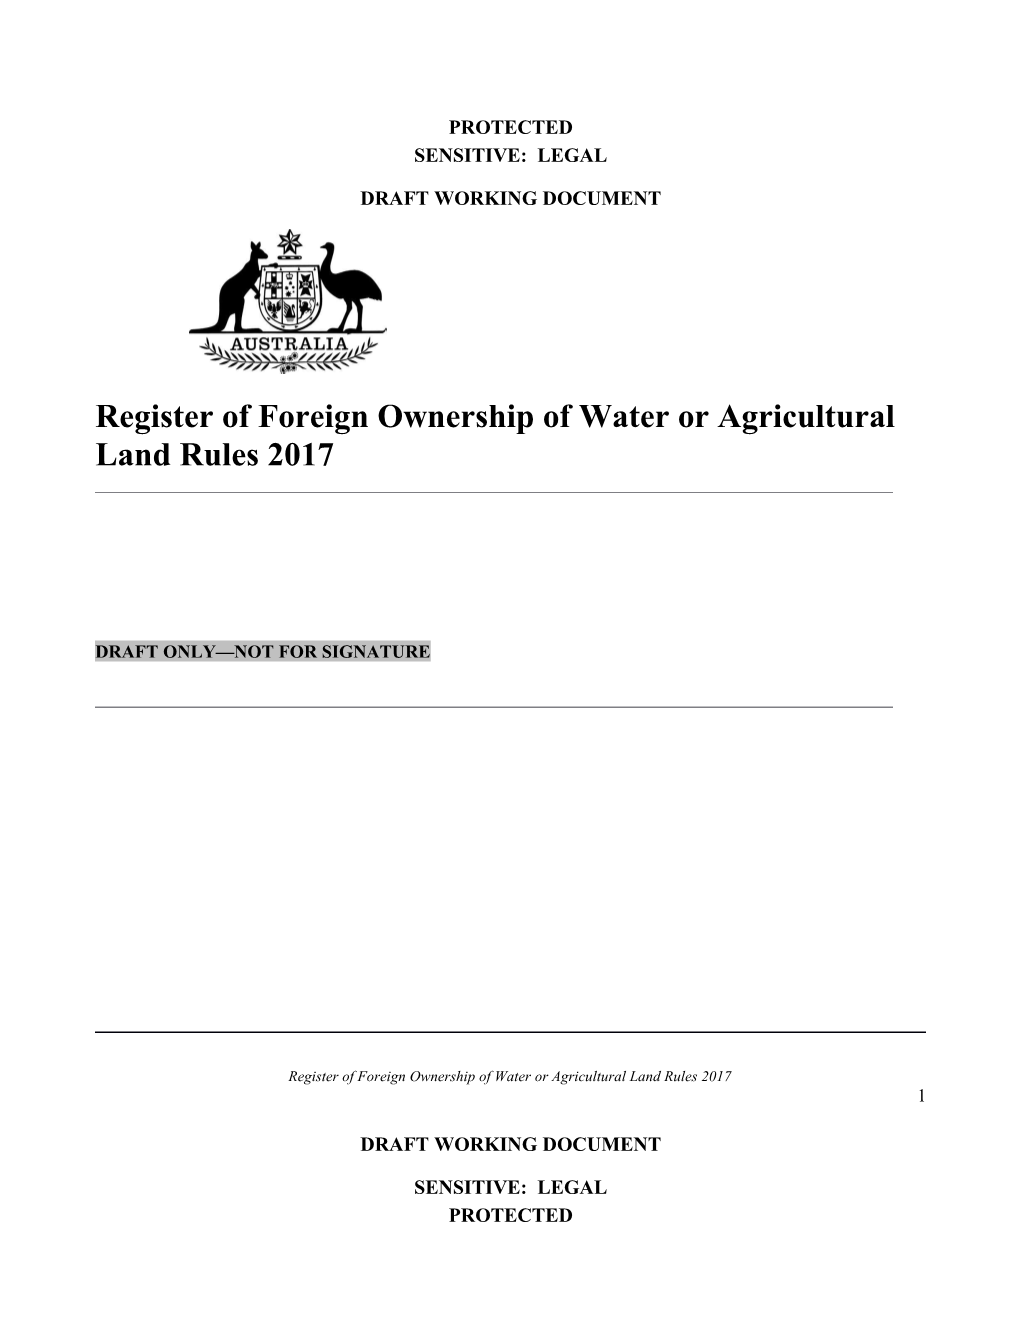 Exposure Draft - Register of Foreign Ownership of Water Or Agricultural Land Rules 2017